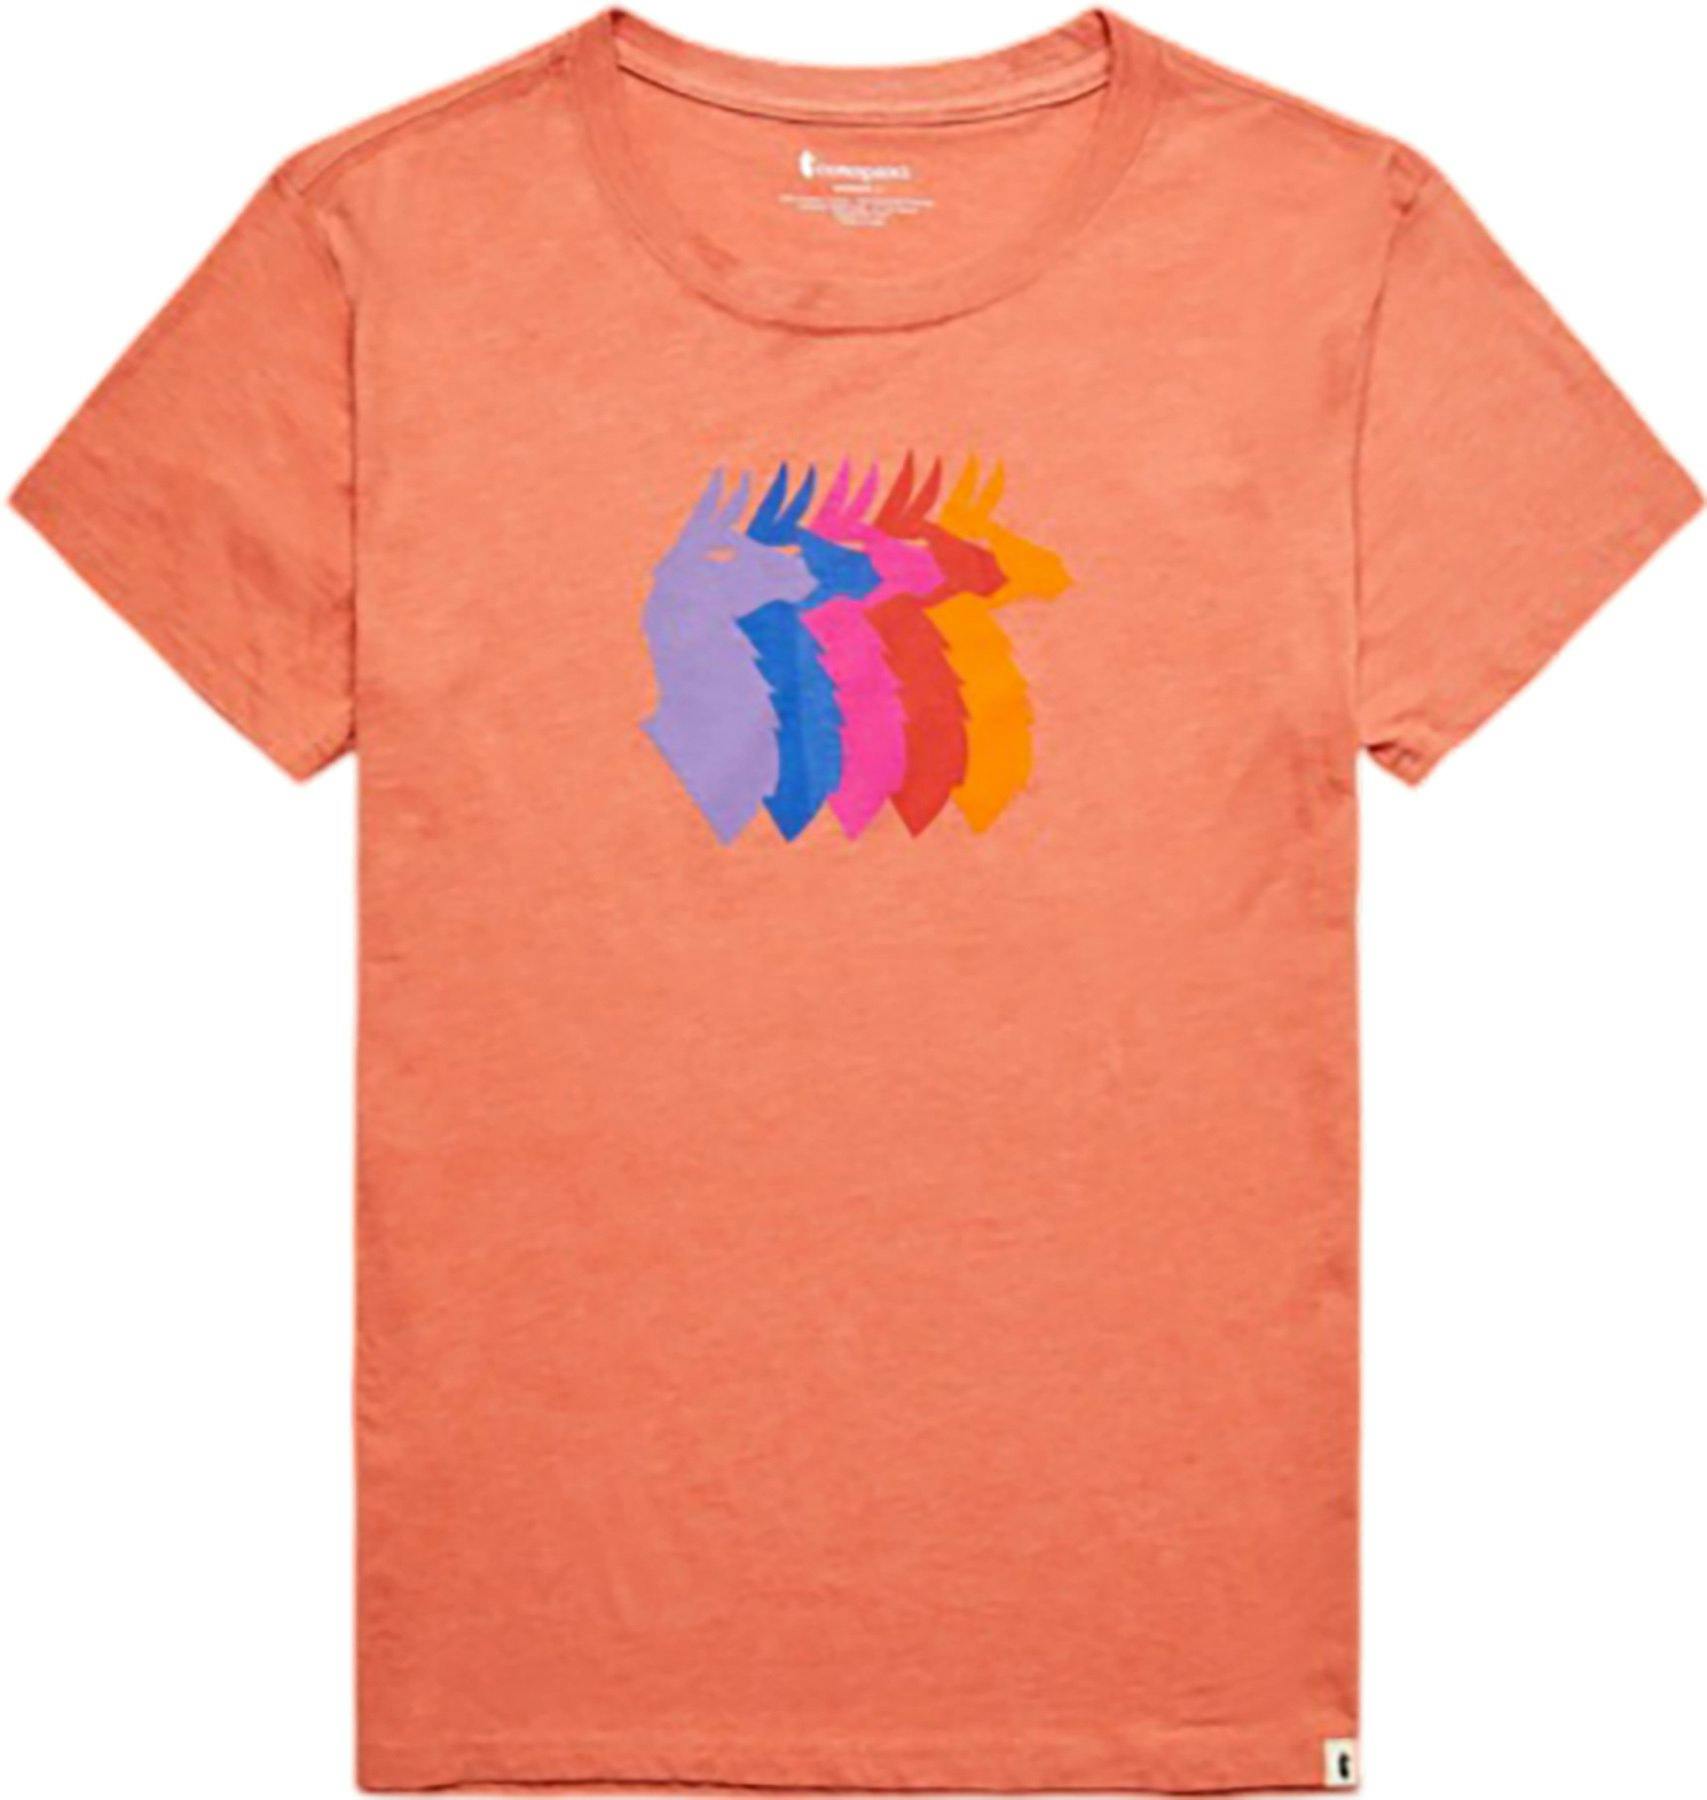 Product image for Llama Sequence Organic T-Shirt - Women's